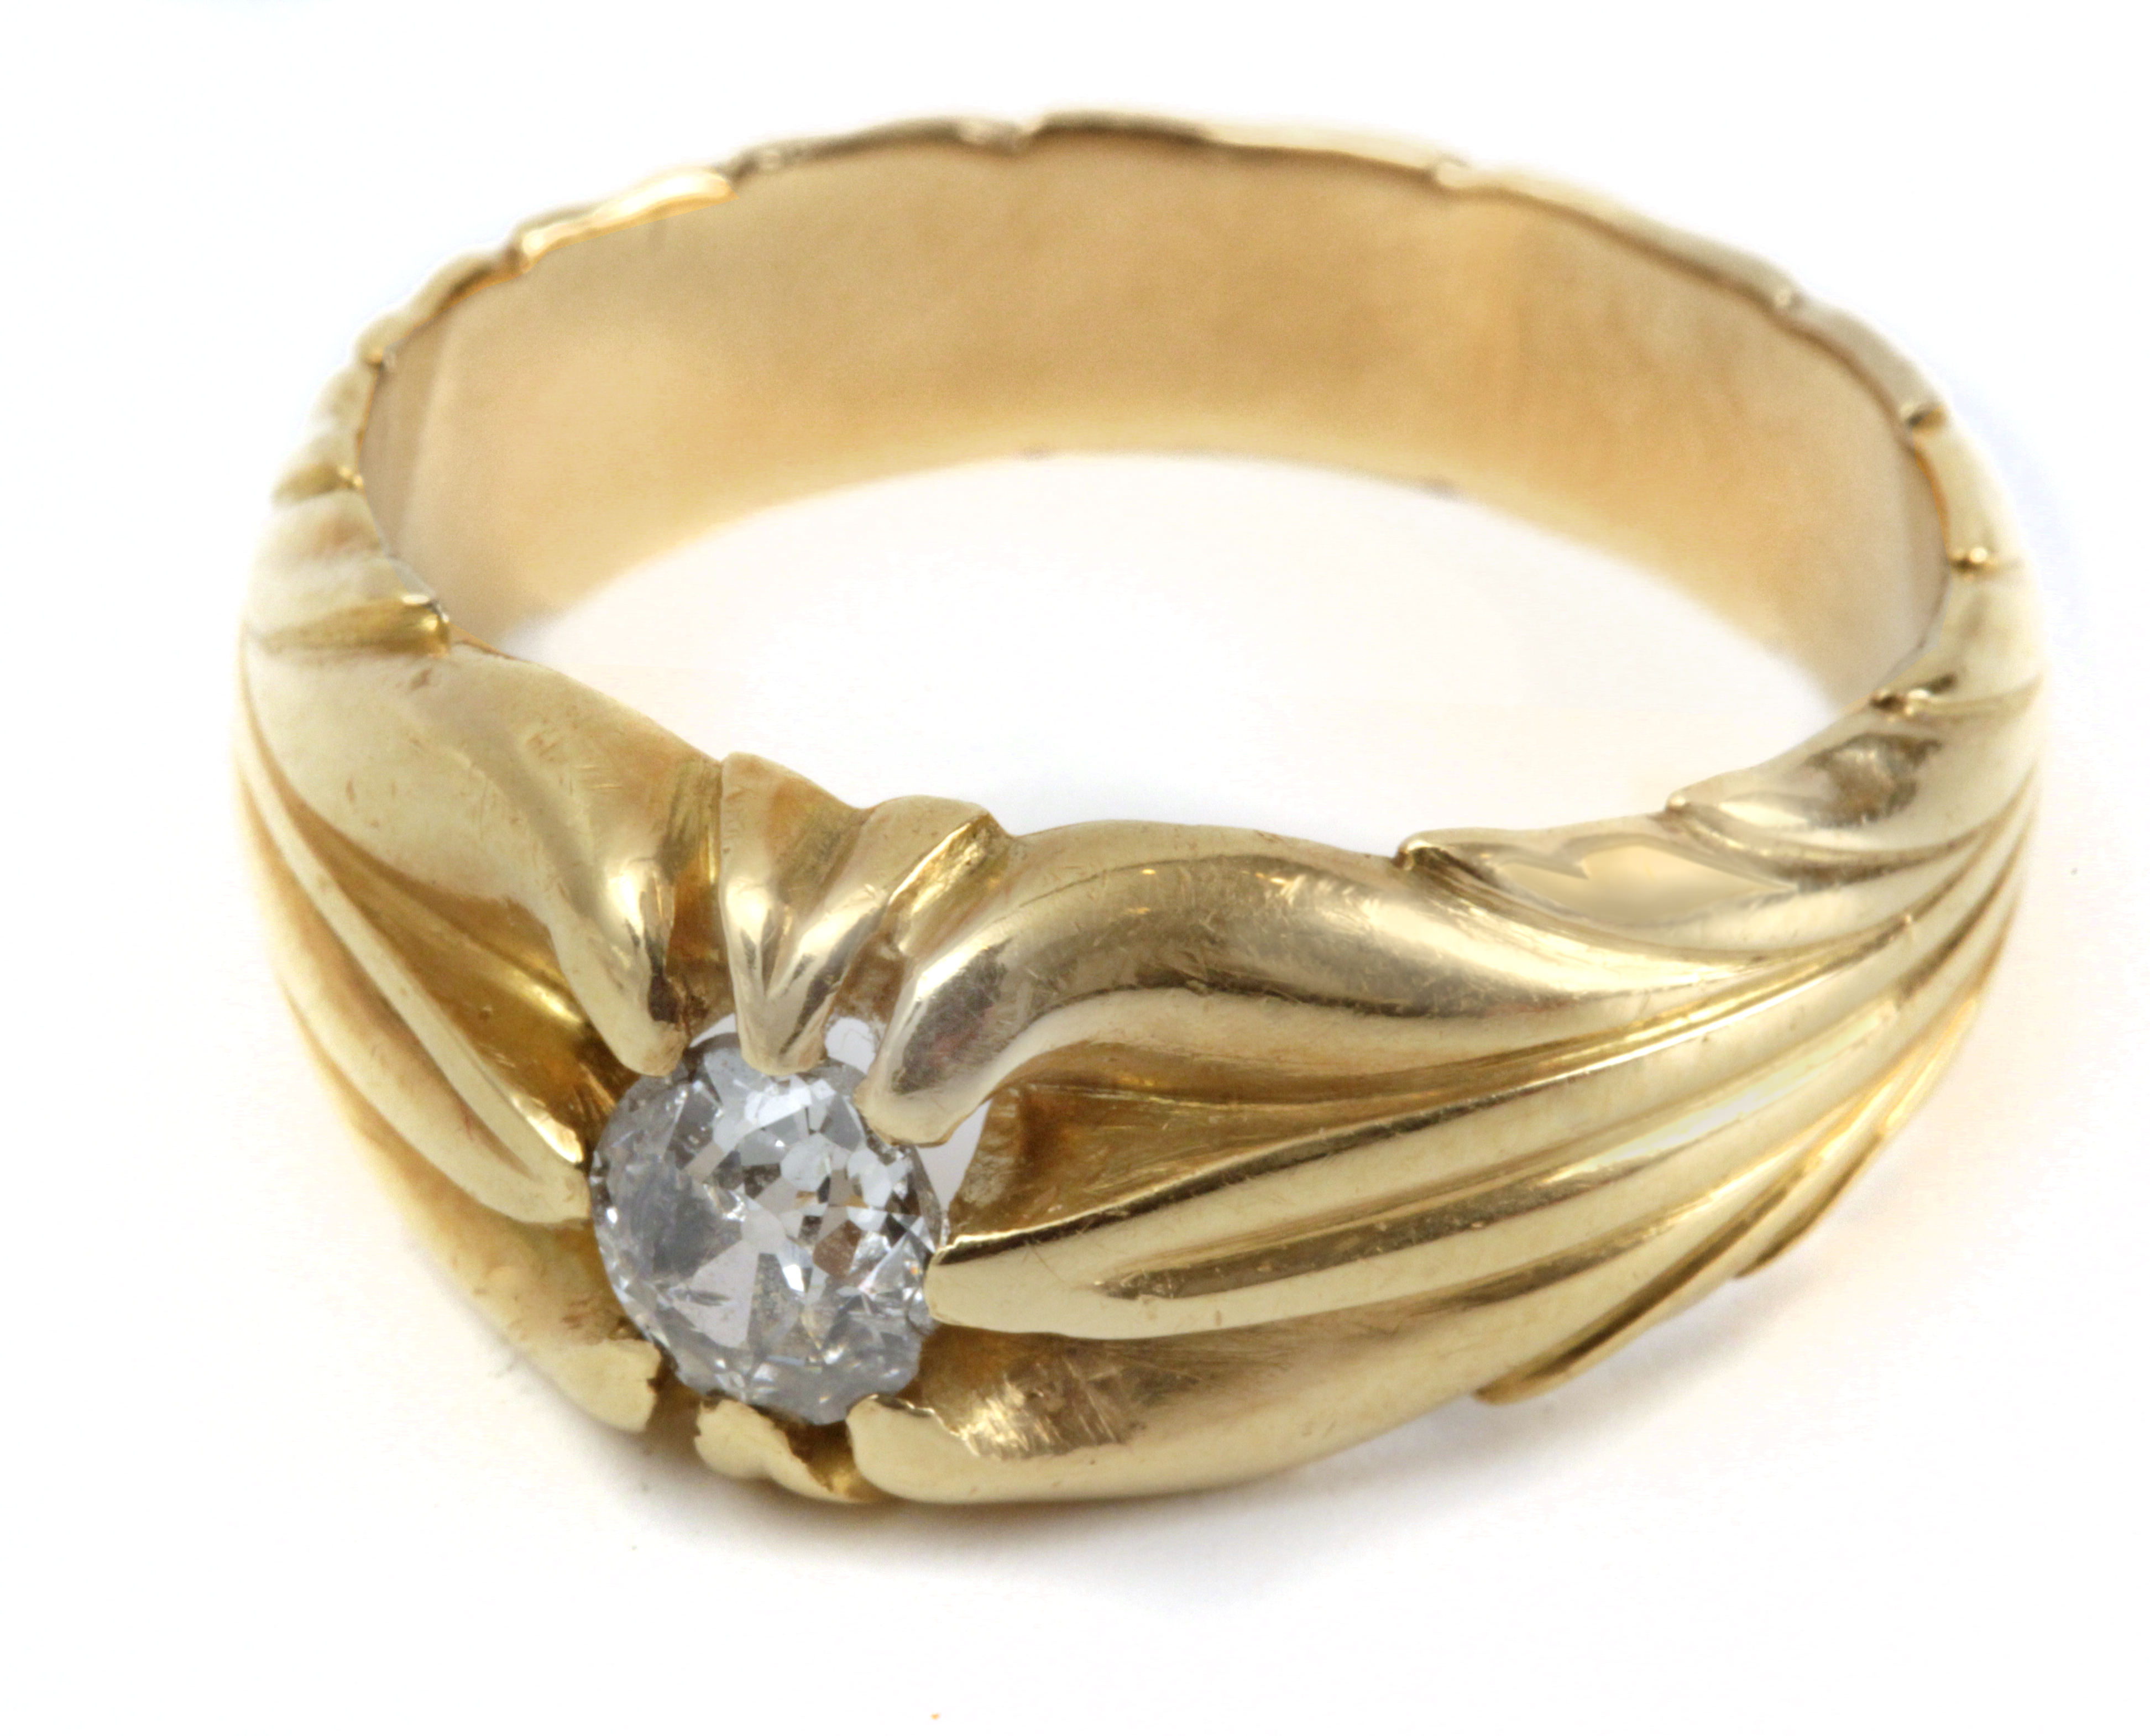 A 0,33 ct. Old European cut diamond solitaire ring with an 18k. yellow gold setting